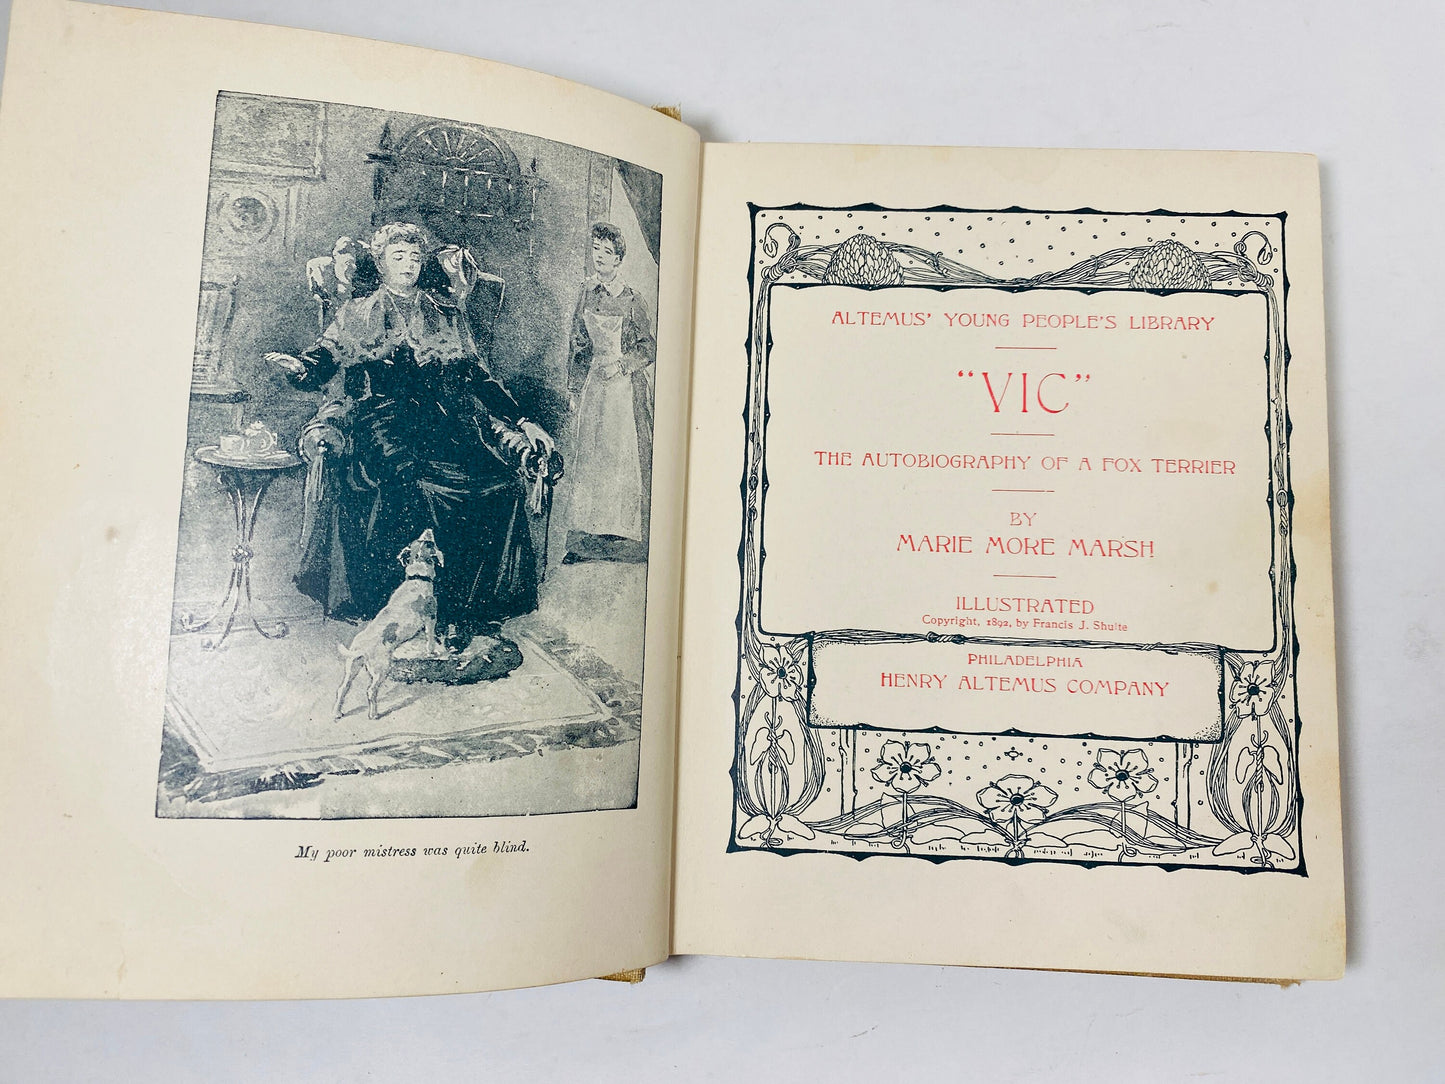 Vic the Autobiography of a Fox Terrier FIRST EDITION vintage children's book by Marie More Marsh circa 1892 Altemus dog puppy collectible